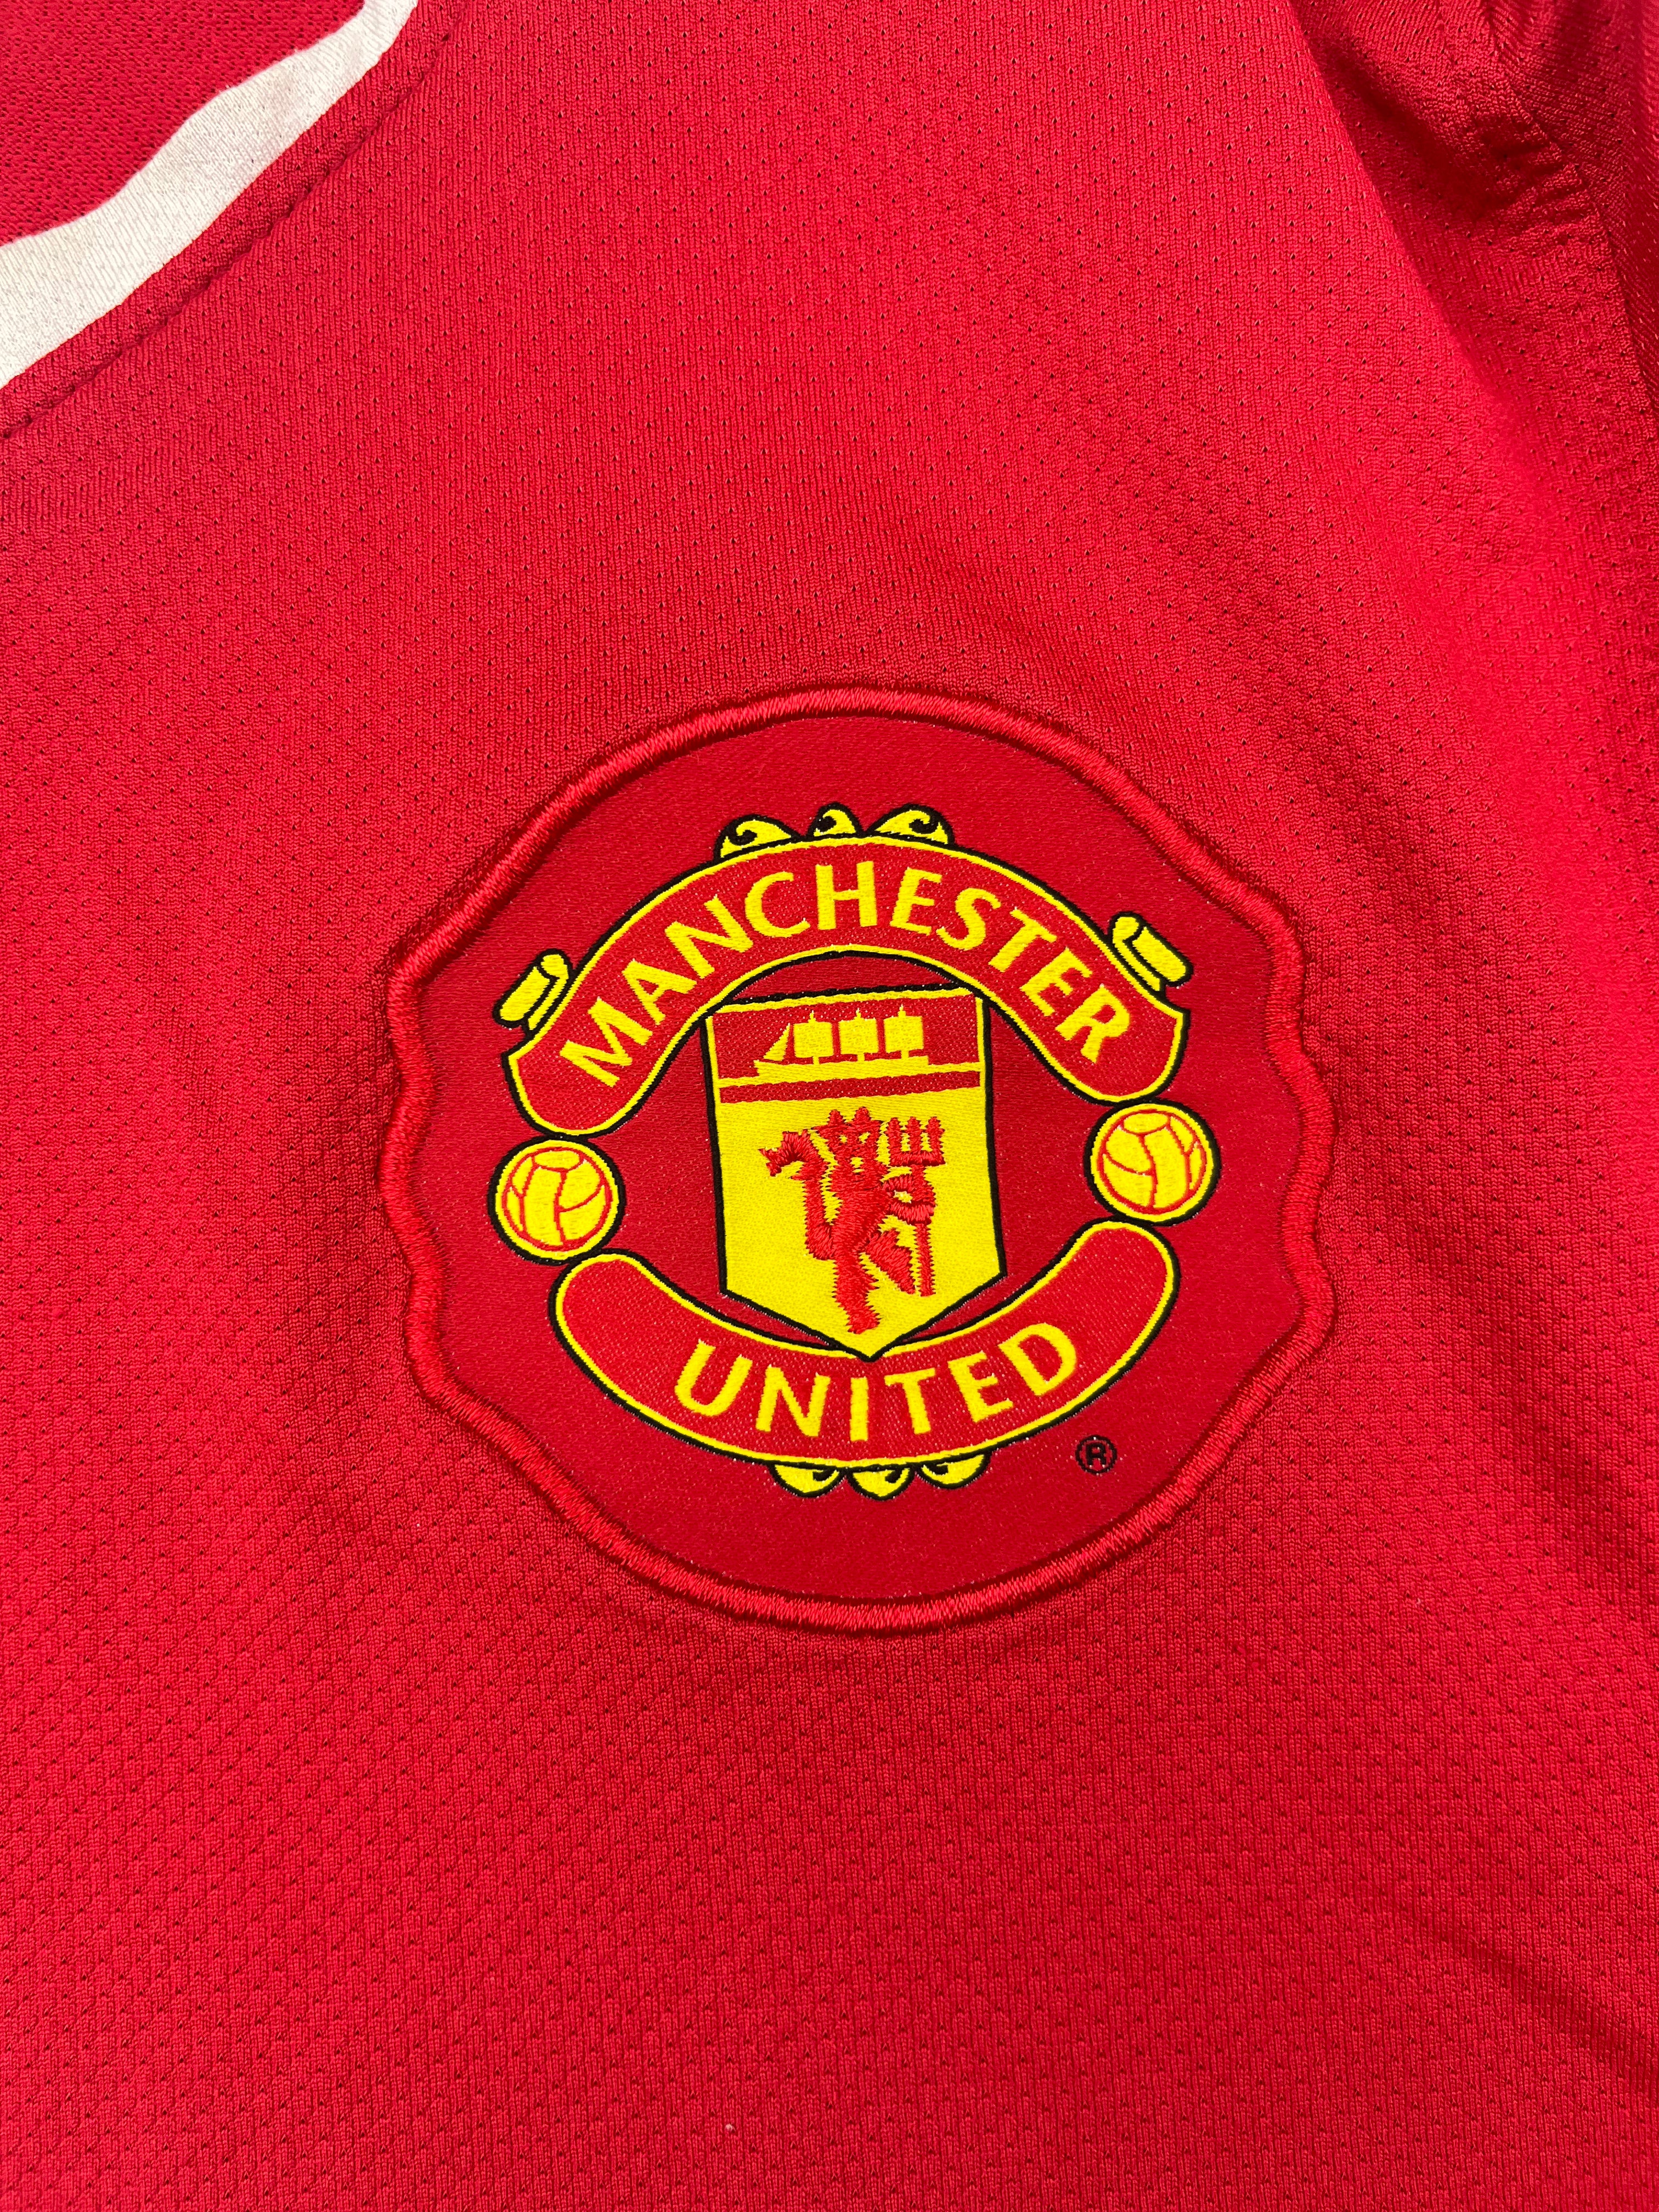 2010/11 Manchester United Home Shirt (S) 8.5/10